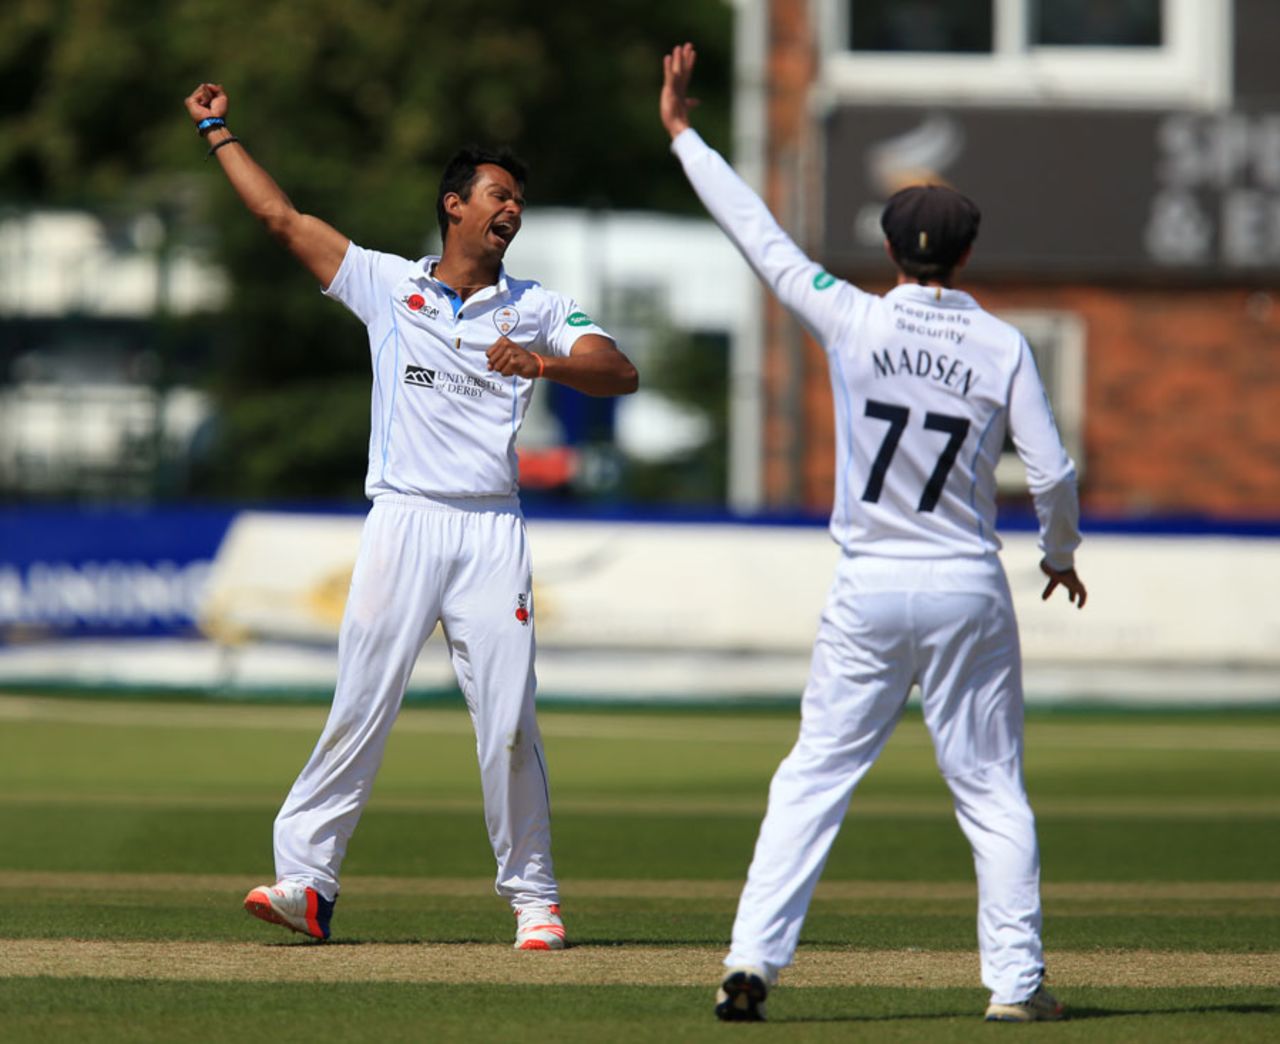 Shiv Thakor claimed a five-wicket haul to go with his hundred, Derbyshire v Kent, County Championship, Division Two, Derby, 3rd day, May 24, 2016